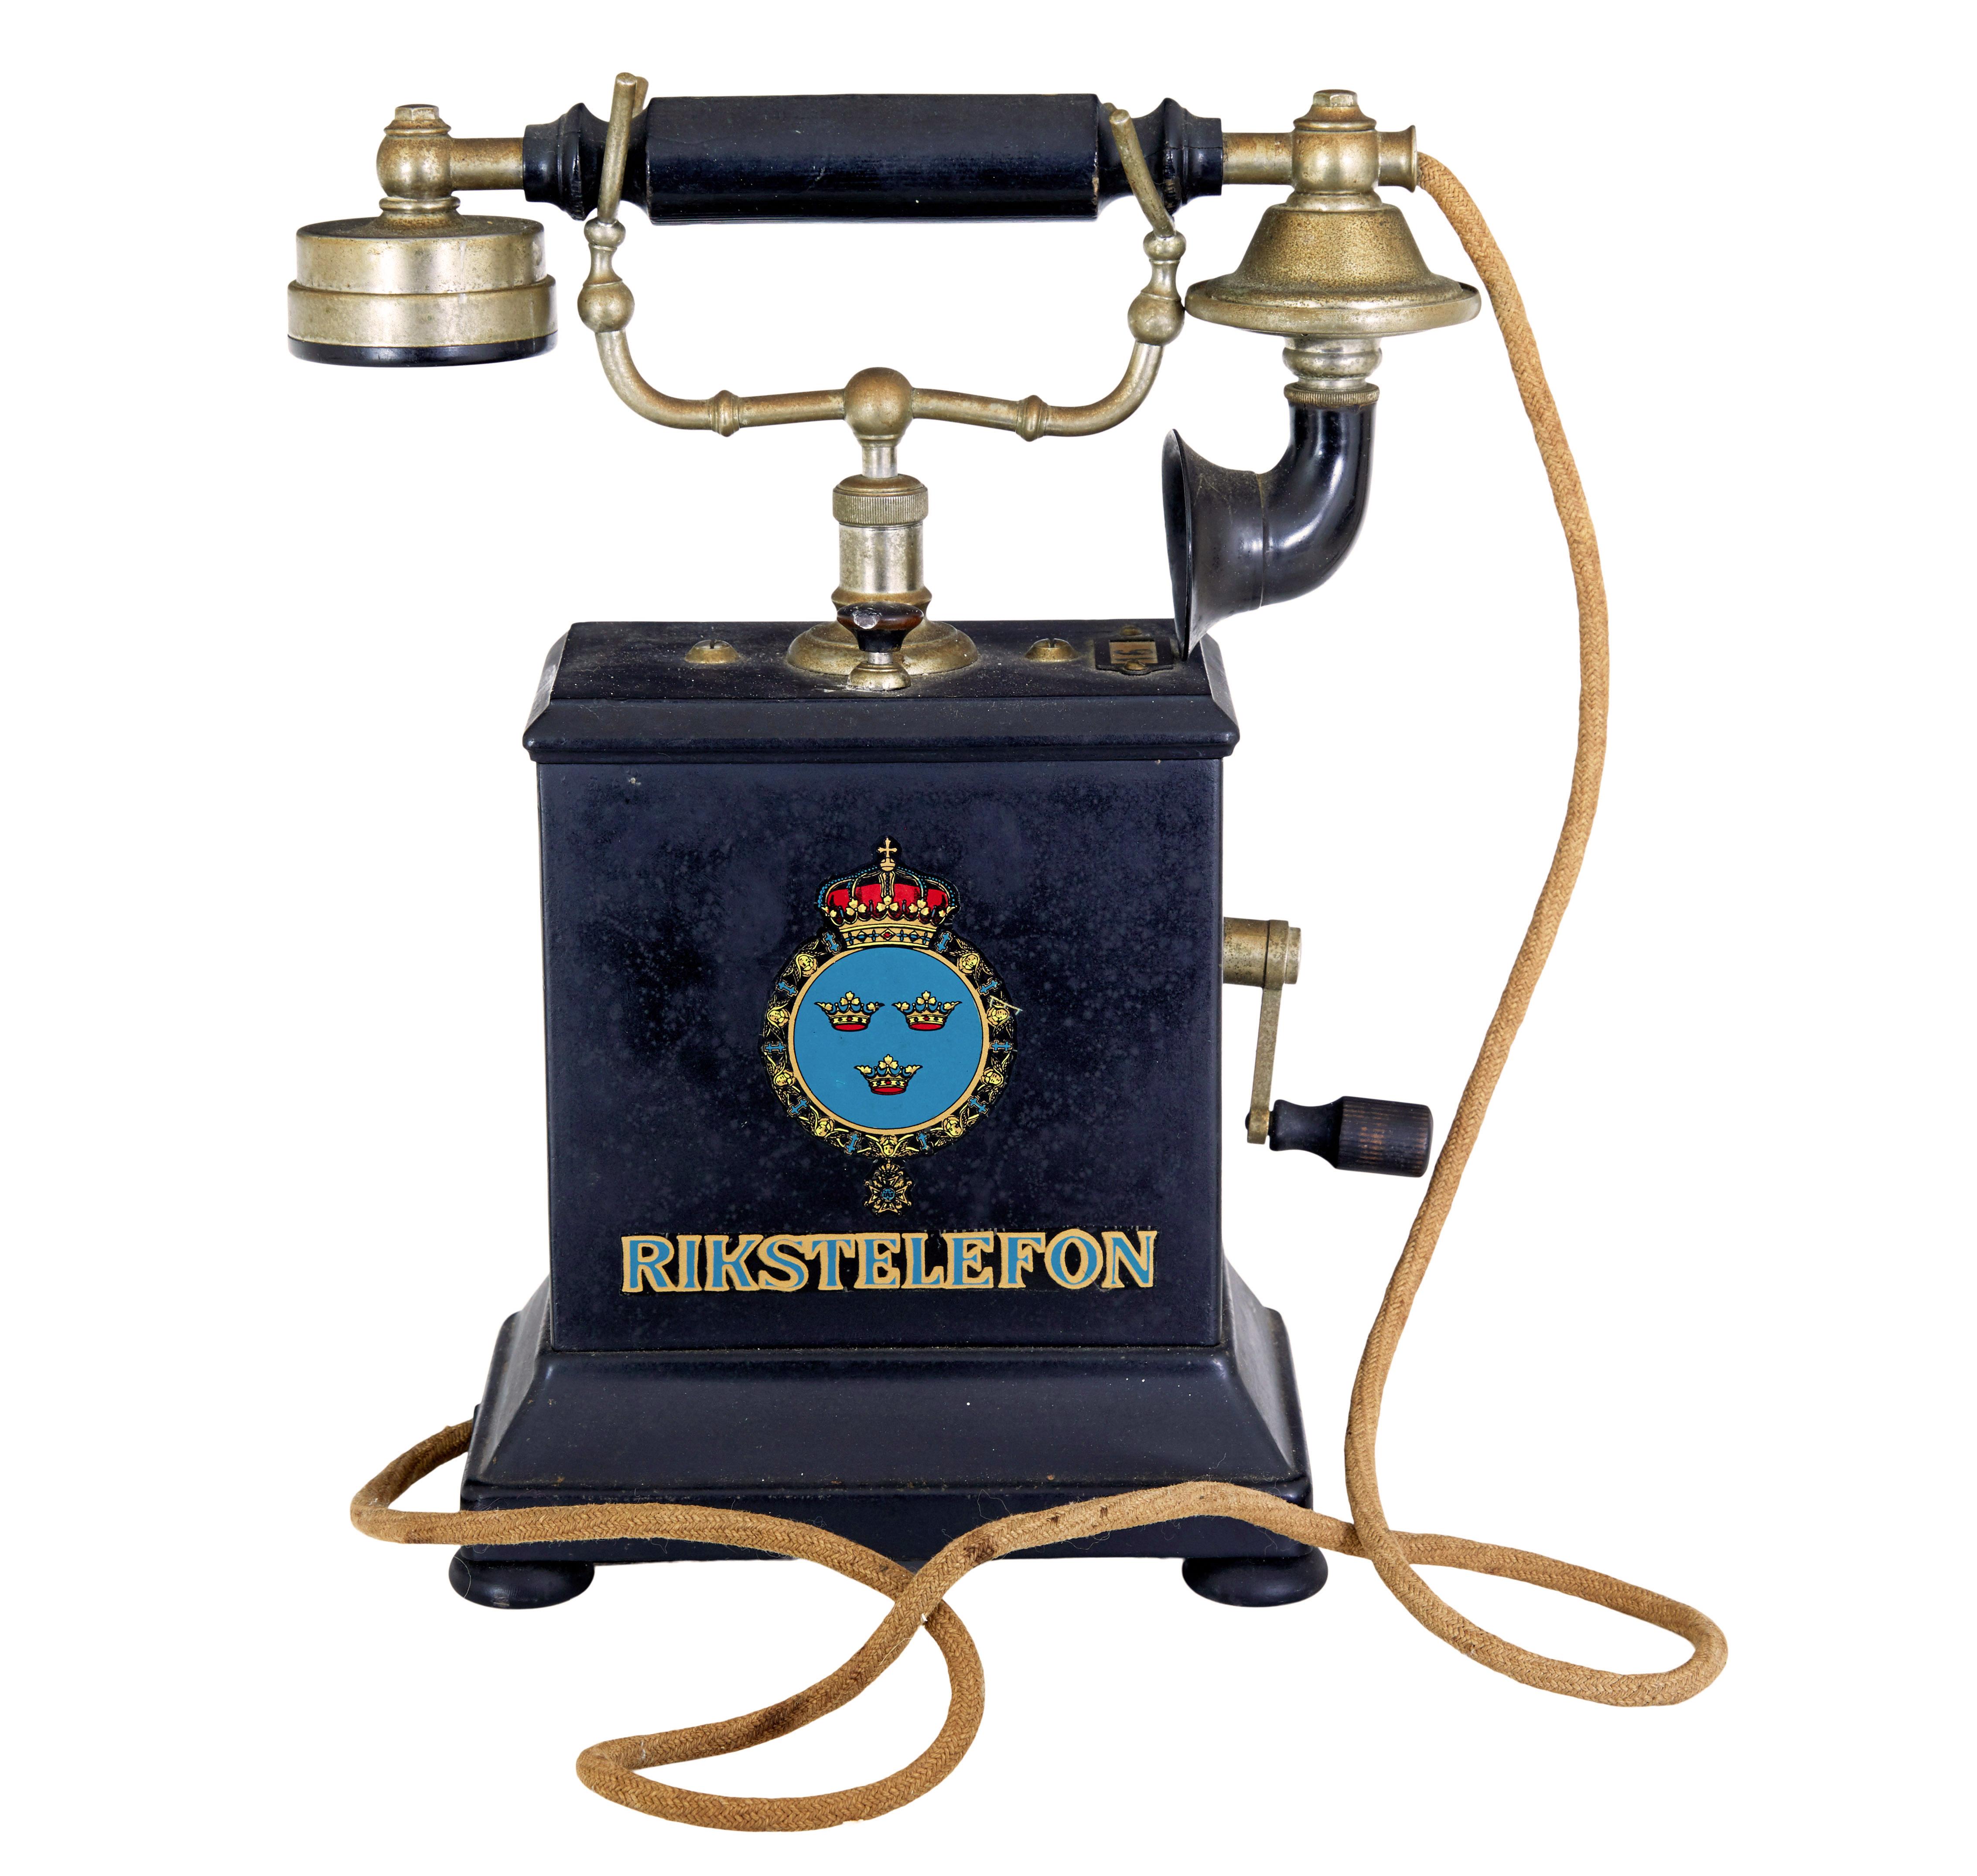 Early 20th century swedish metal telephone by rikstelefon circa 1900.

Quite possibly early than dated, here we have a sheet metal rikstelefon telephone set.  Rikstelefon was the national network provider from the 19th century to the late 20th